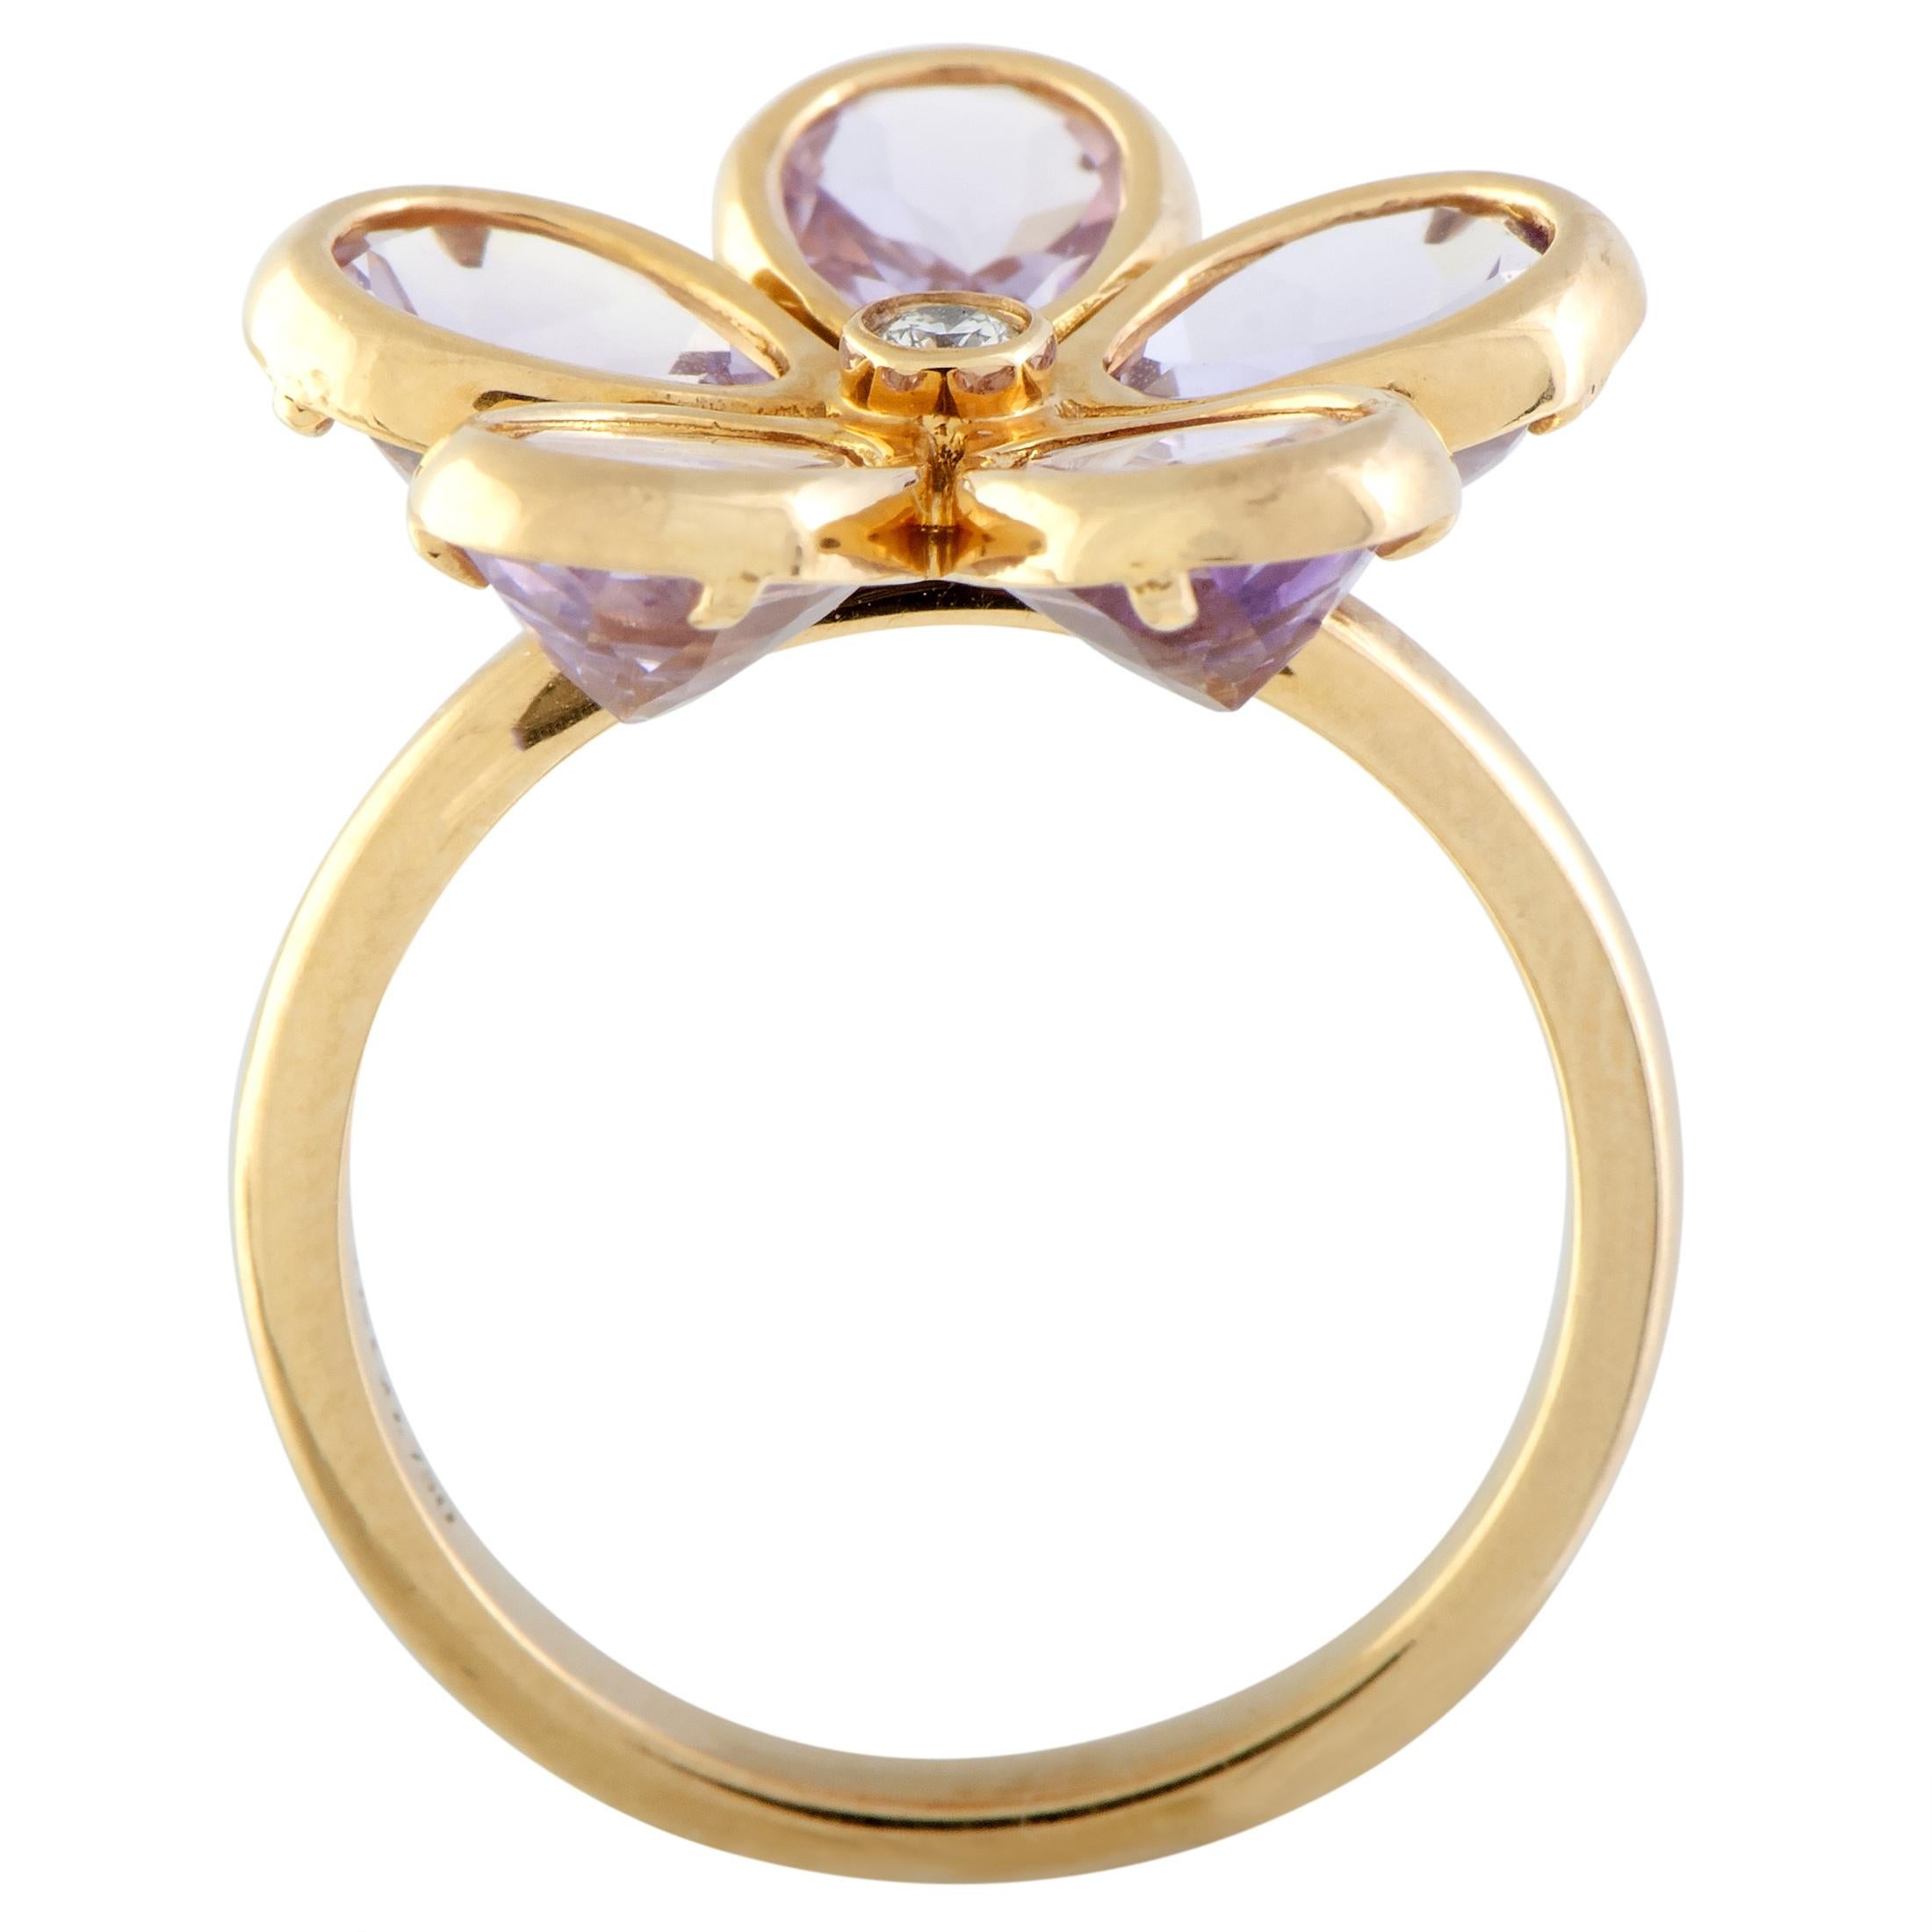 The gracefully feminine and enticingly gentle floral motif is provided delightful color by the wonderful amethysts while the charming central diamond lends its timeless resplendence to this brilliantly designed and expertly crafted 18K rose gold